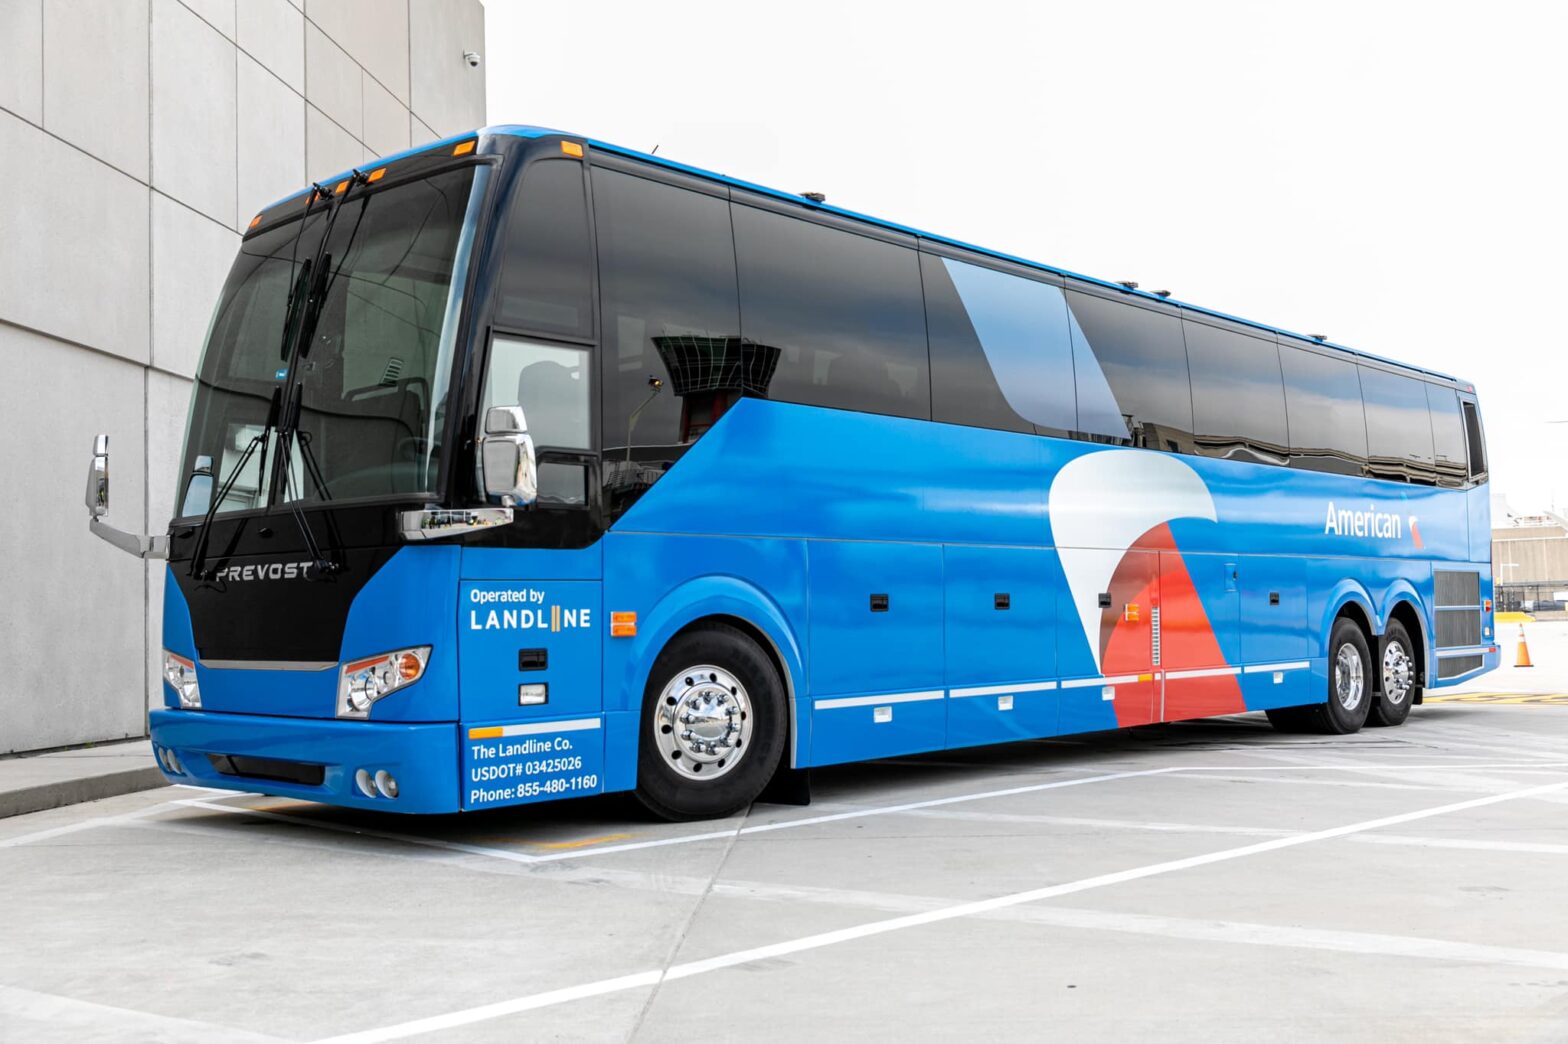 American Airlines Introduces Bus Program at PHL, Bypassing Security Lines